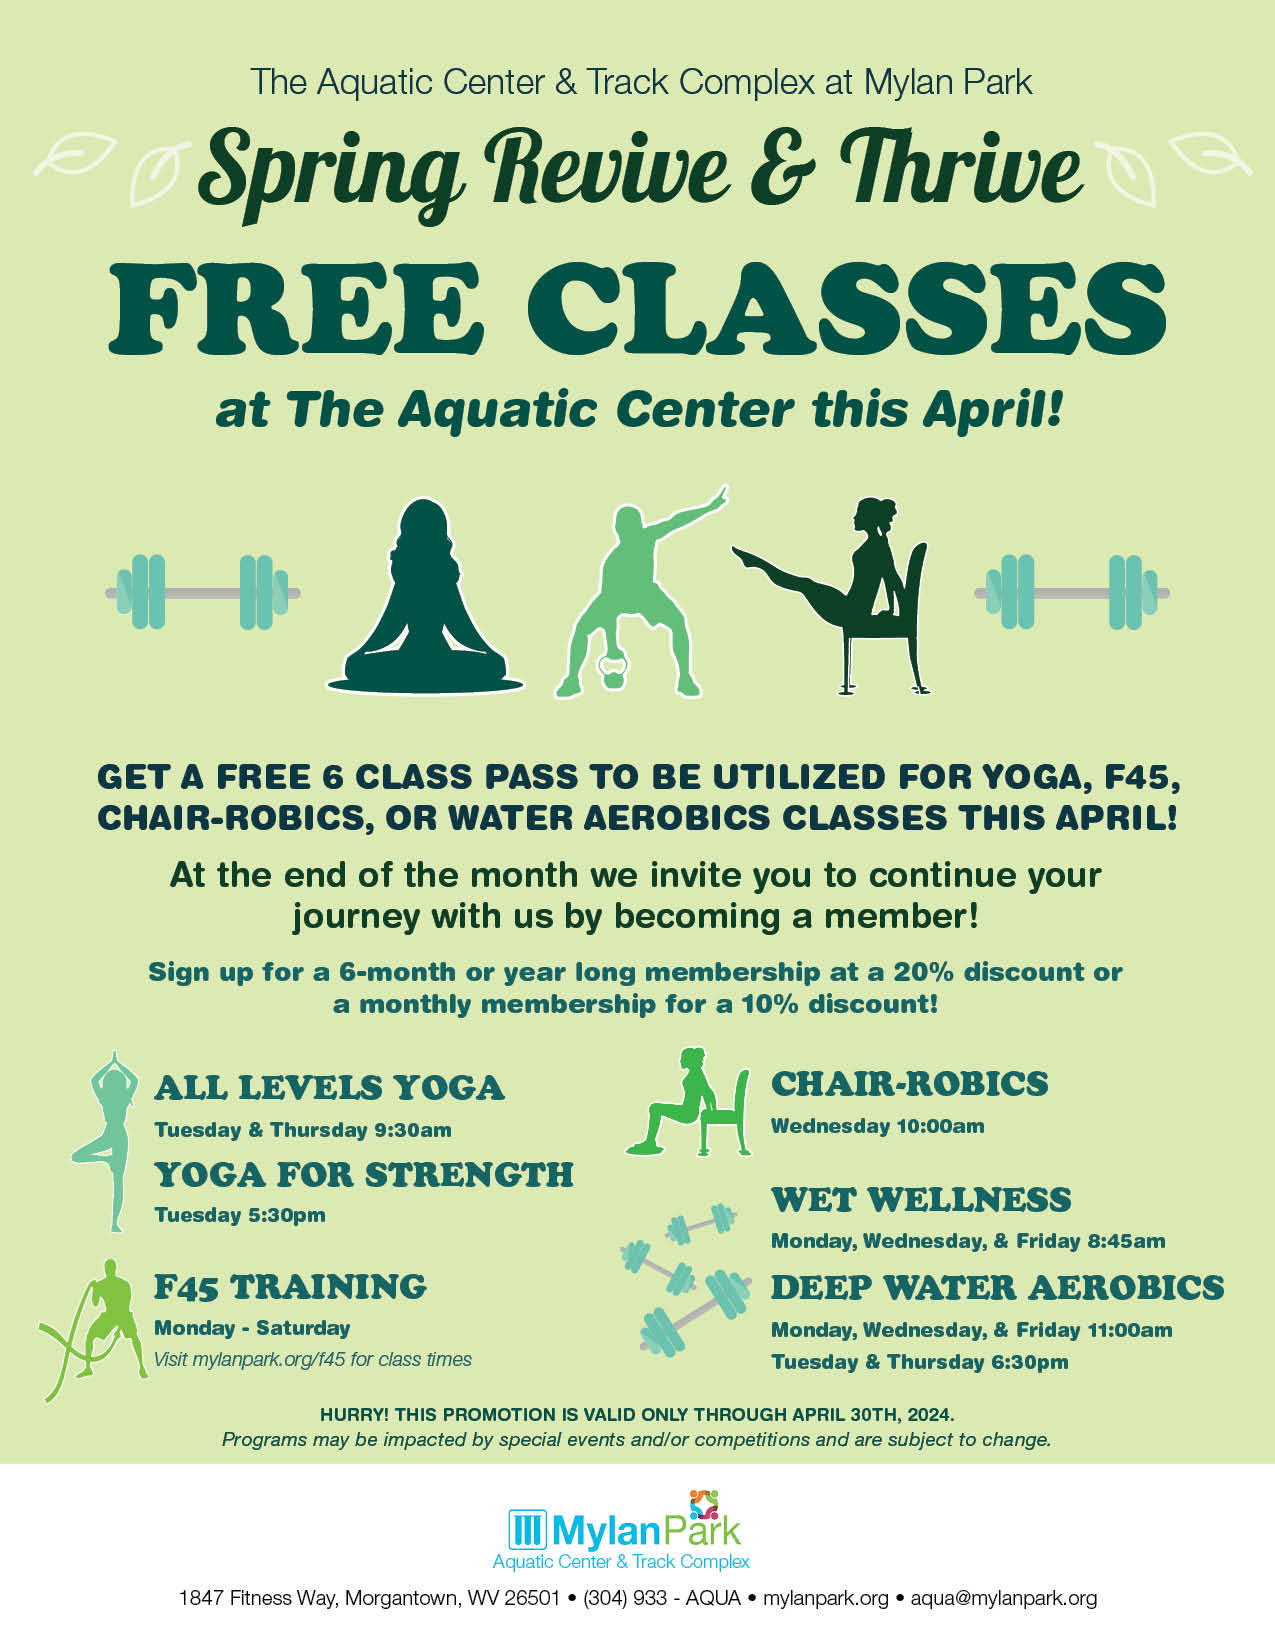 FREE CLASSES at The Aquatic Center this April! GET A FREE 6 CLASS PASS TO BE UTILIZED FOR YOGA, F45, CHAIR-ROBICS, OR WATER AEROBICS CLASSES THIS APRIL! HURRY! THIS PROMOTION IS VALID ONLY THROUGH APRIL 30TH, 2024.